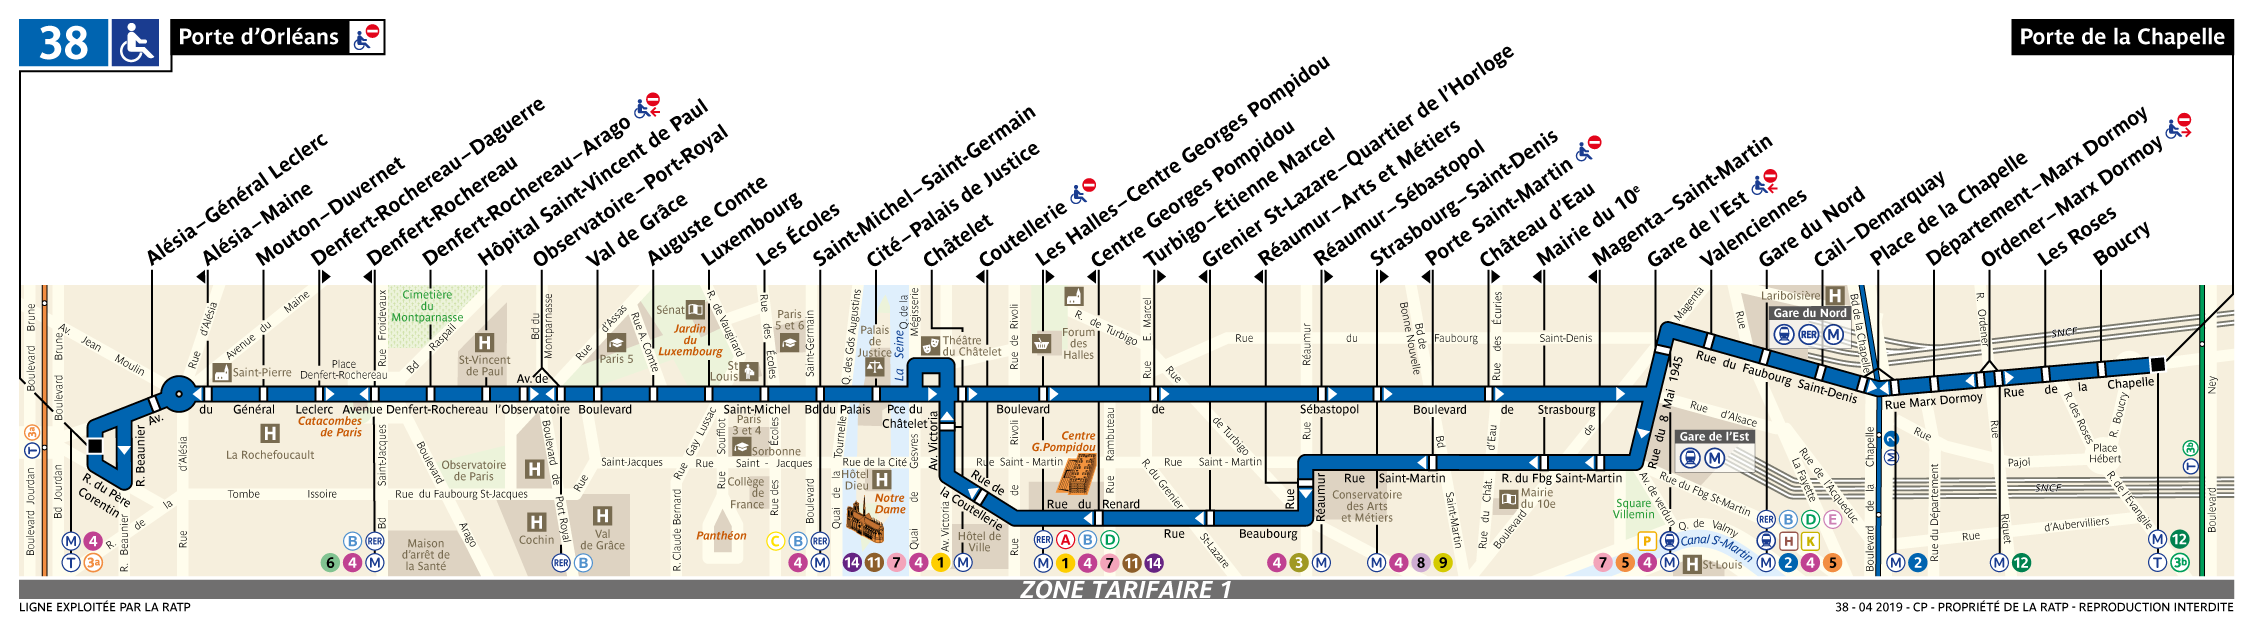 Bus map showing line 38. It is a near-straight line, but in the middle the route splits. Extensive street detail is shown behind the line